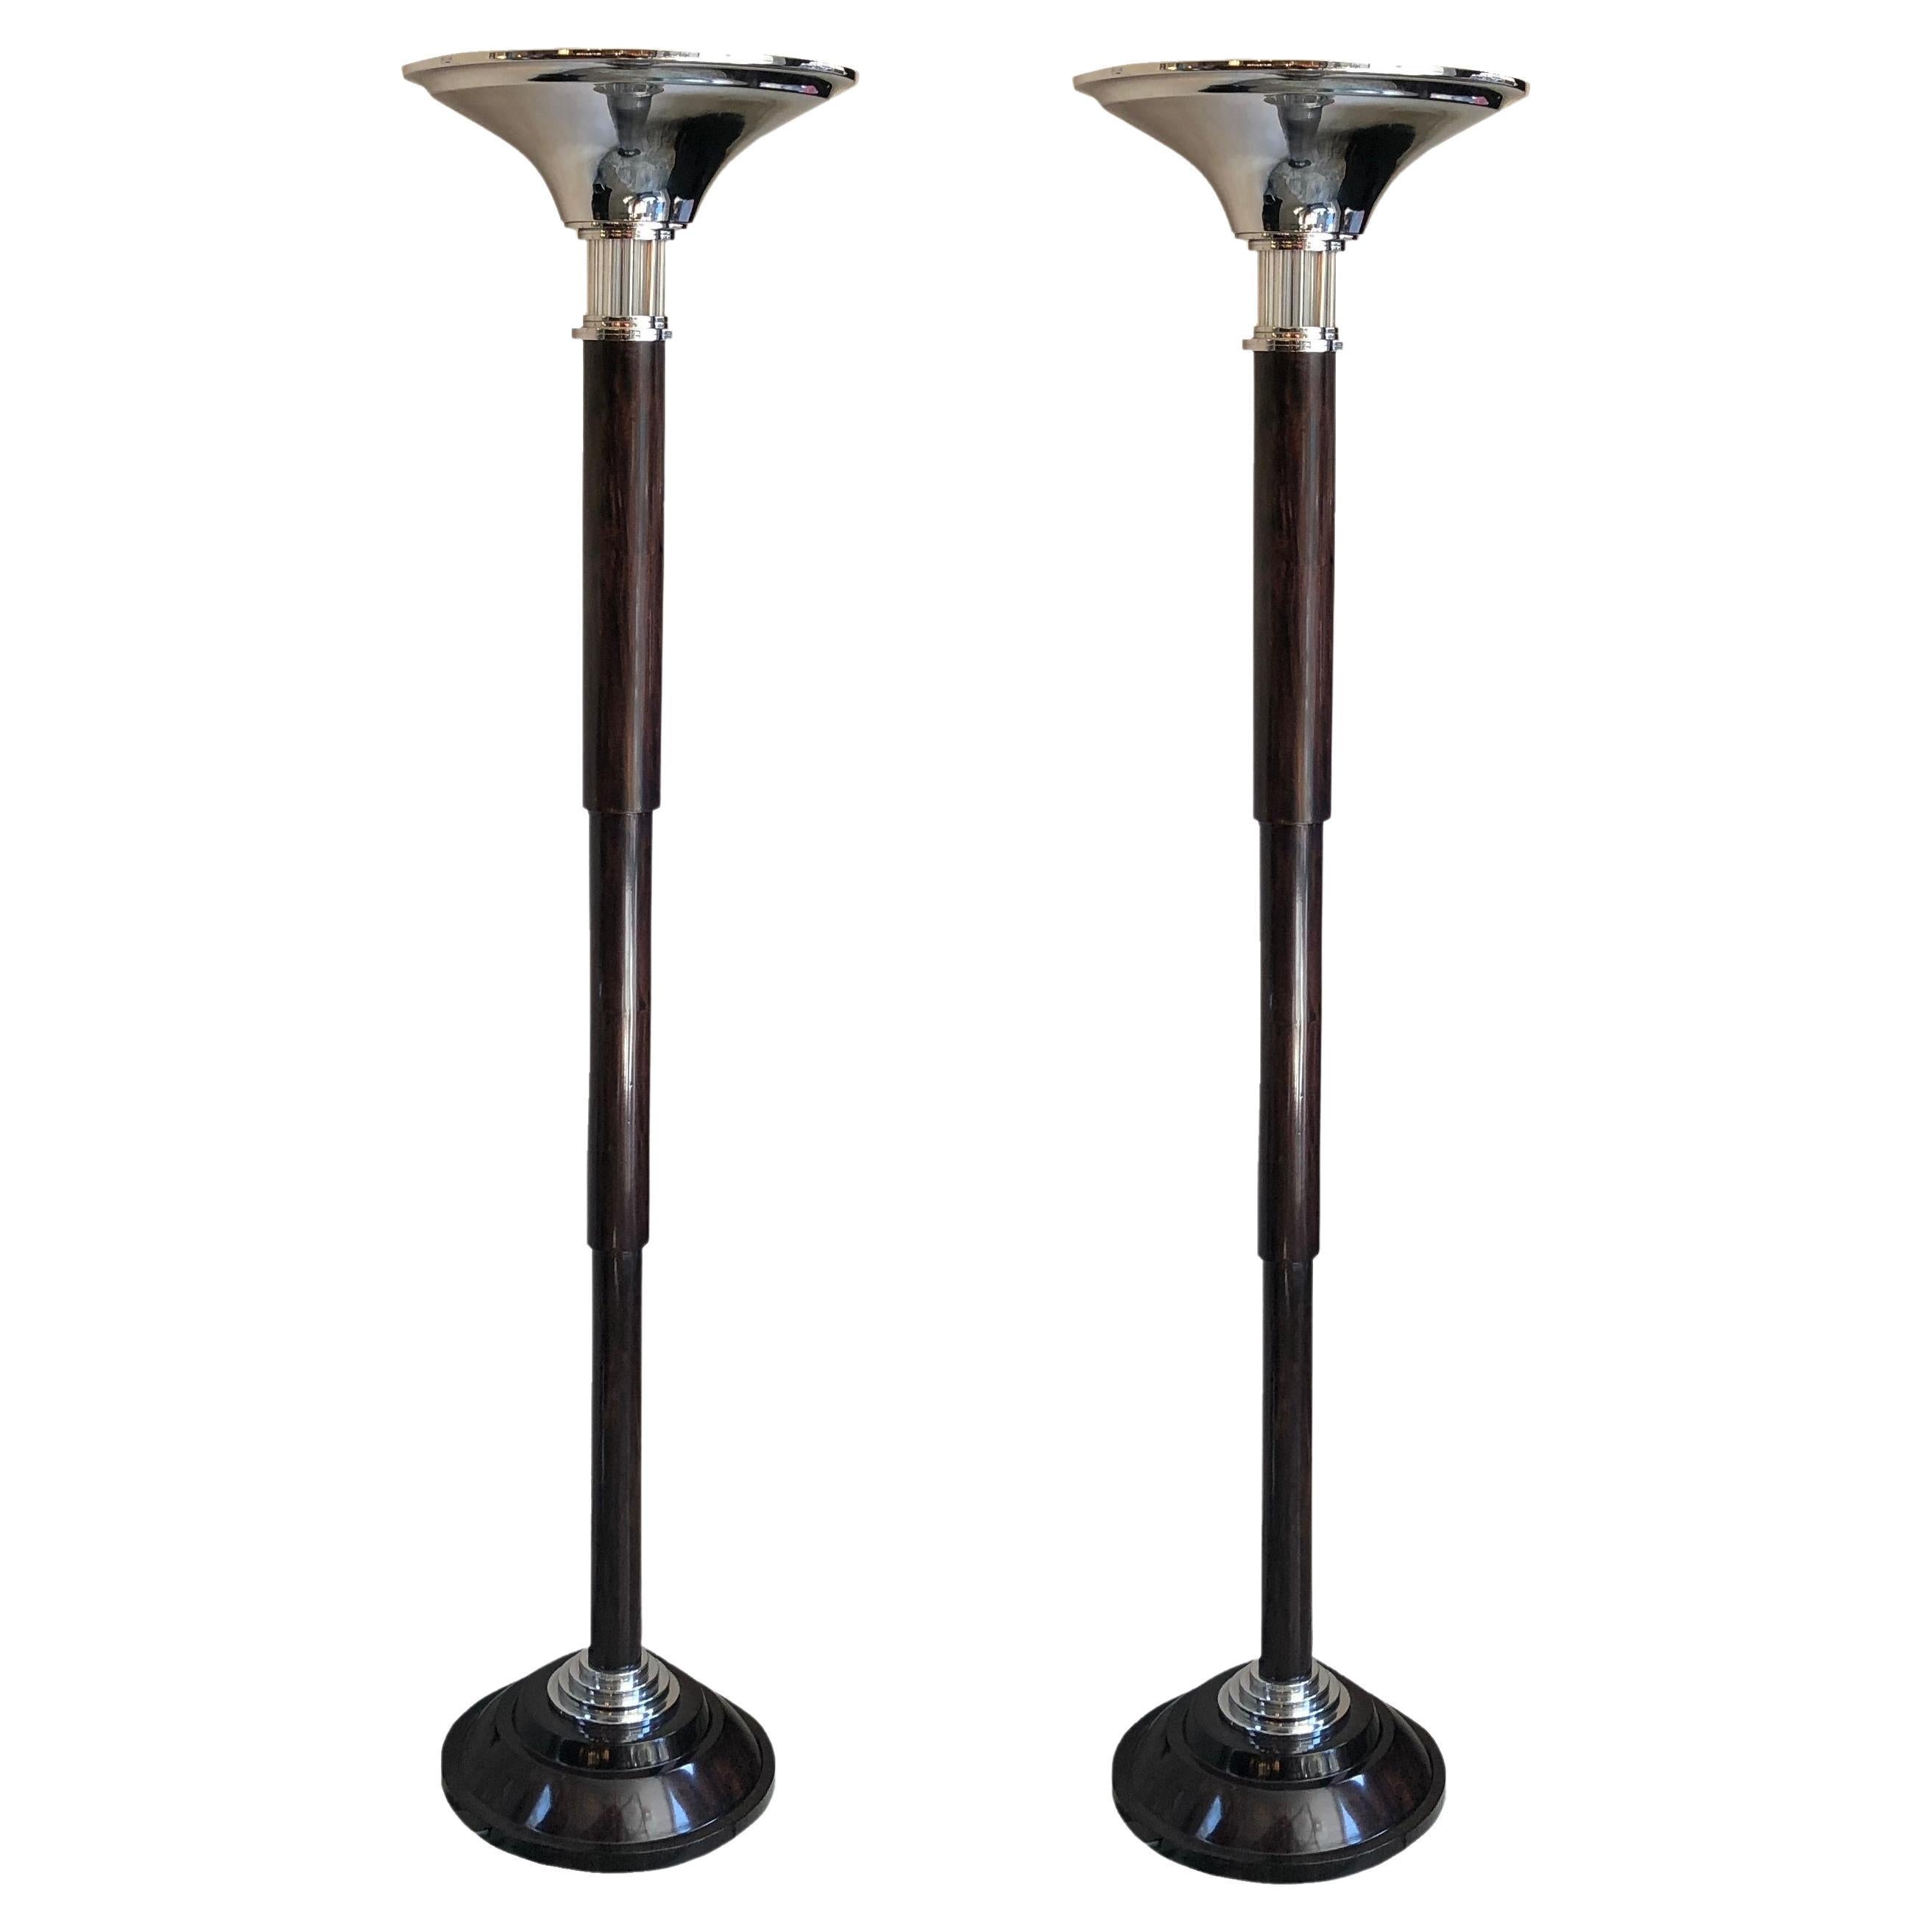 Pair Floor Lamps Art Deco 1930, France, Materials: Wood, Chrome and glass tubes